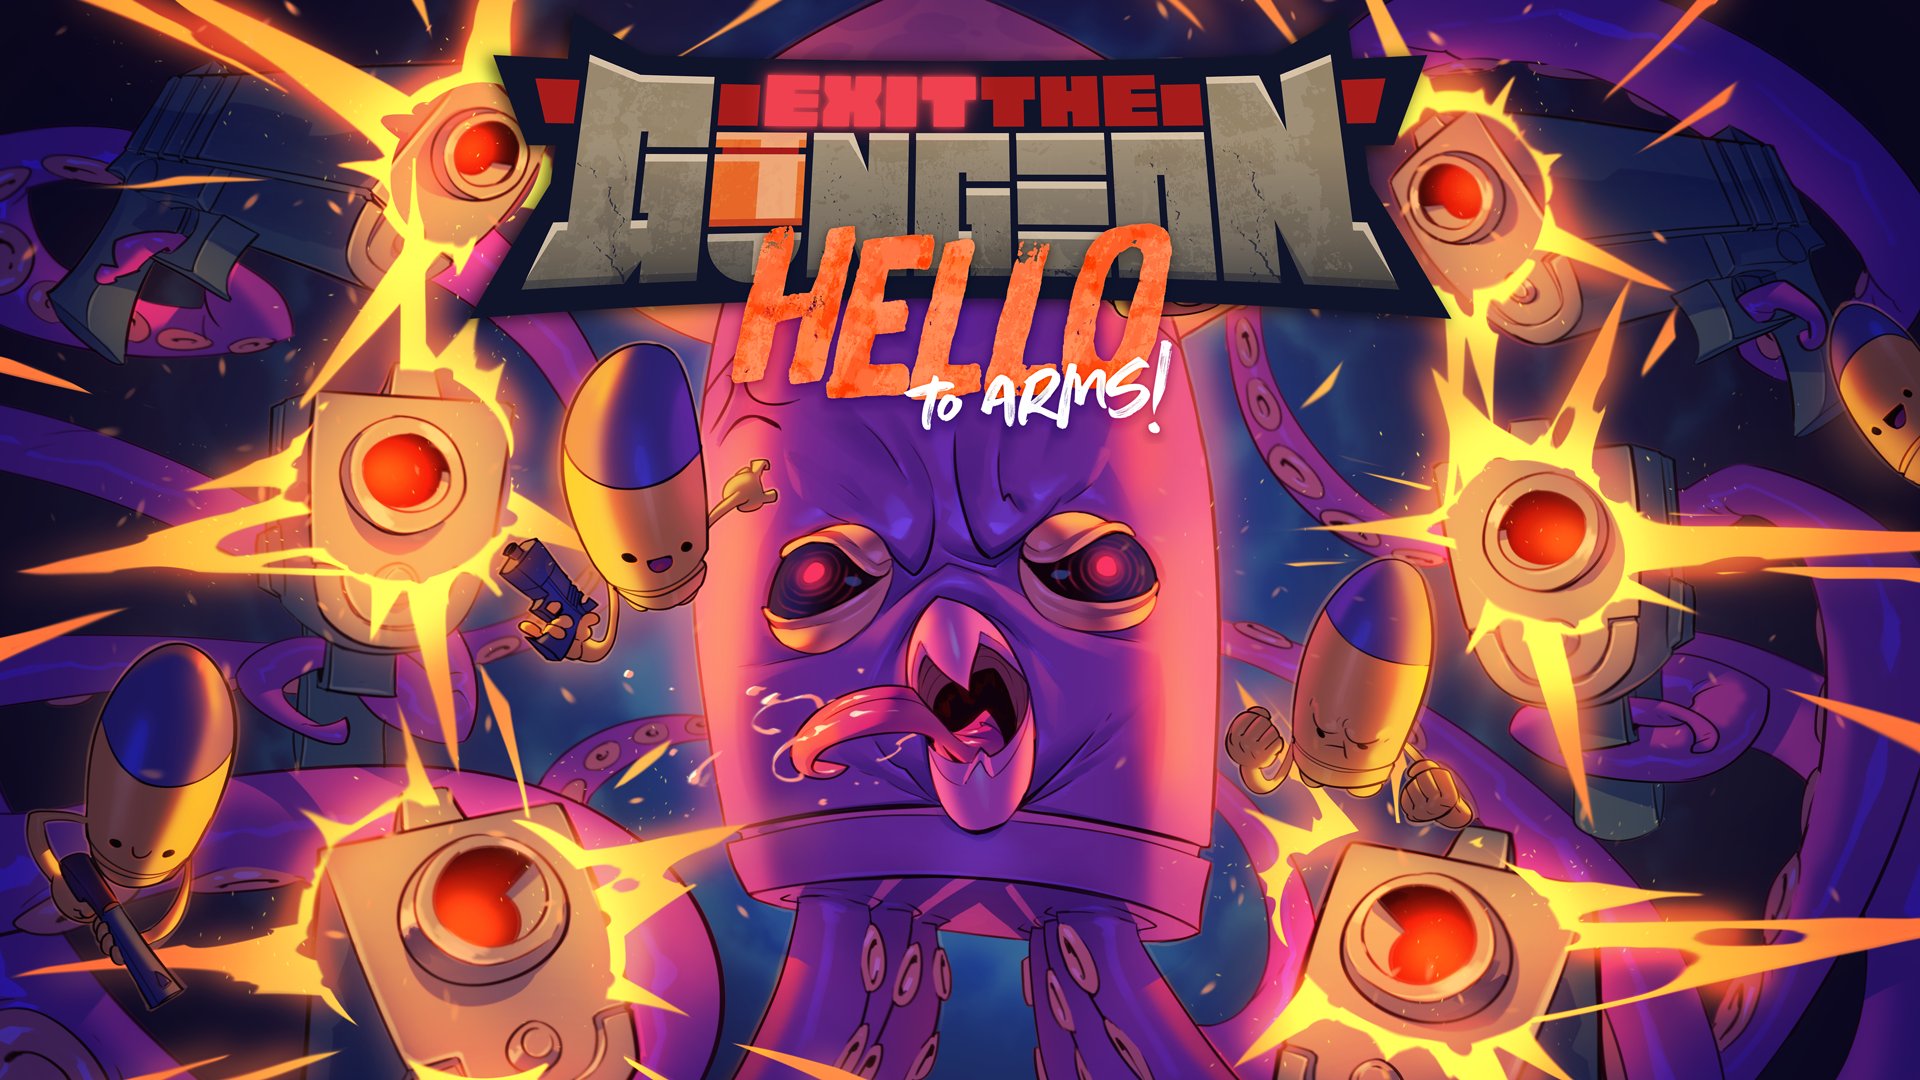 The ‘Exit the Gungeon: Hello to Arms’ Update Arrives This Friday on Apple Arcade Bringing In New Guns, Items, a New Mode, and More